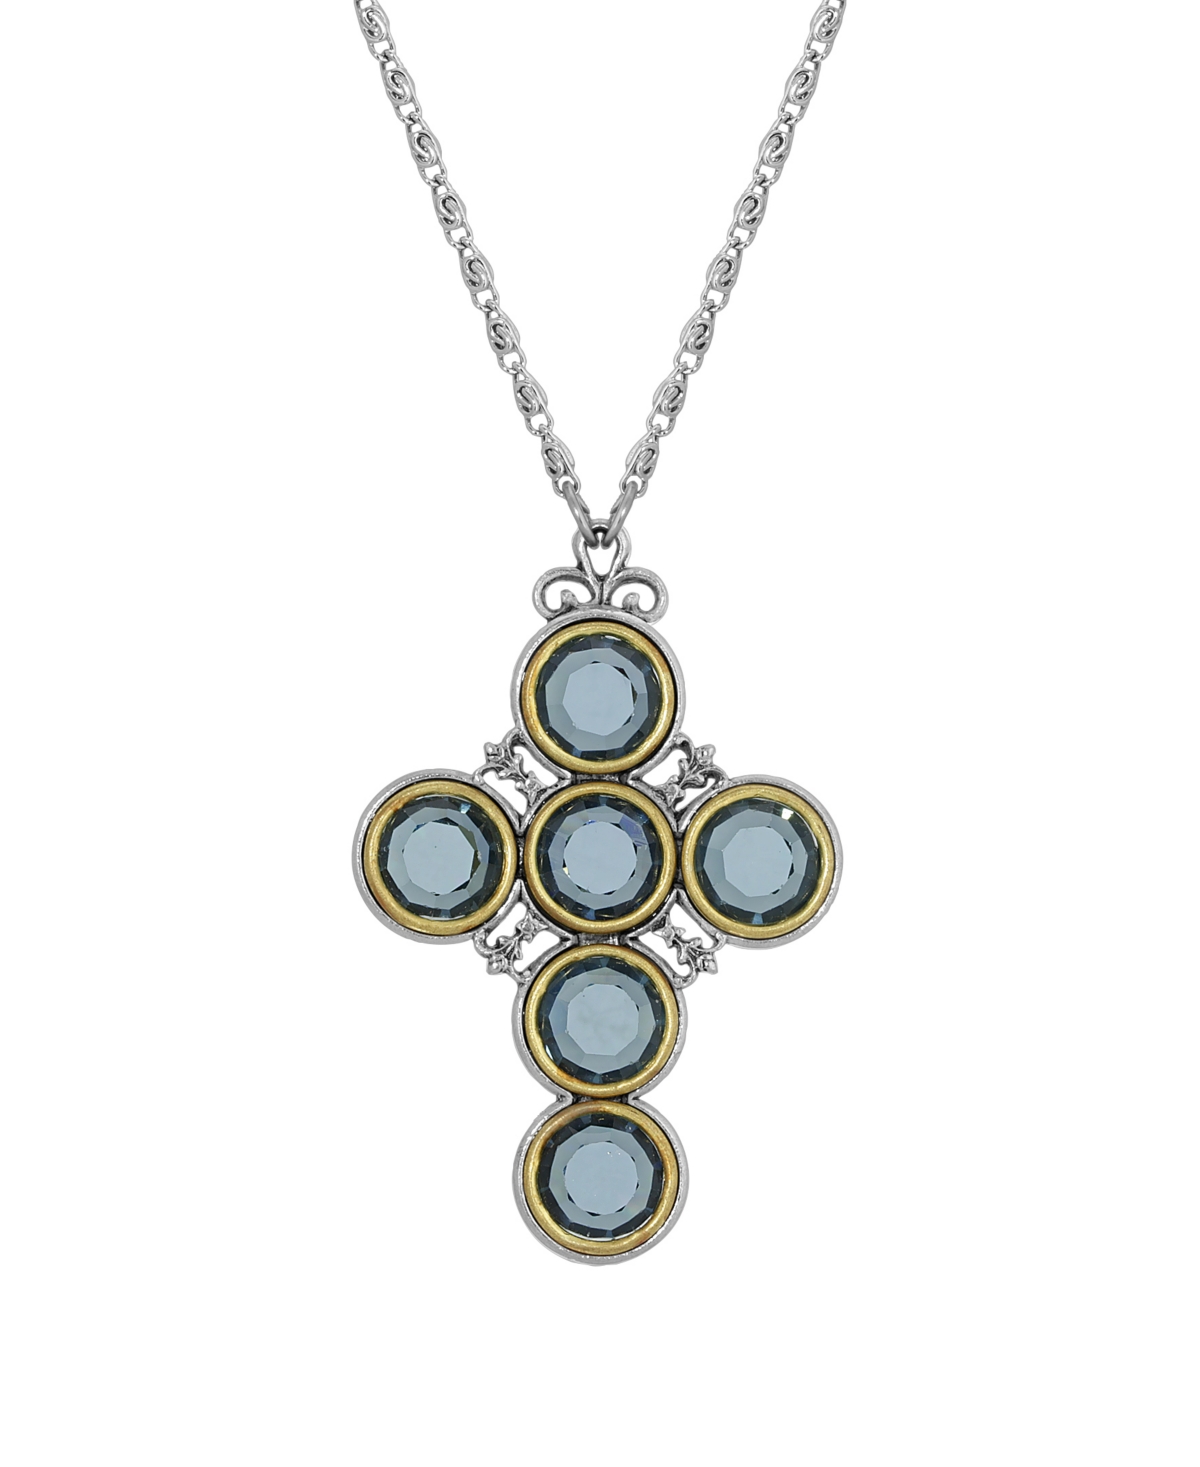 Pewter Cross with Round Blue Crystal Necklace - Blue